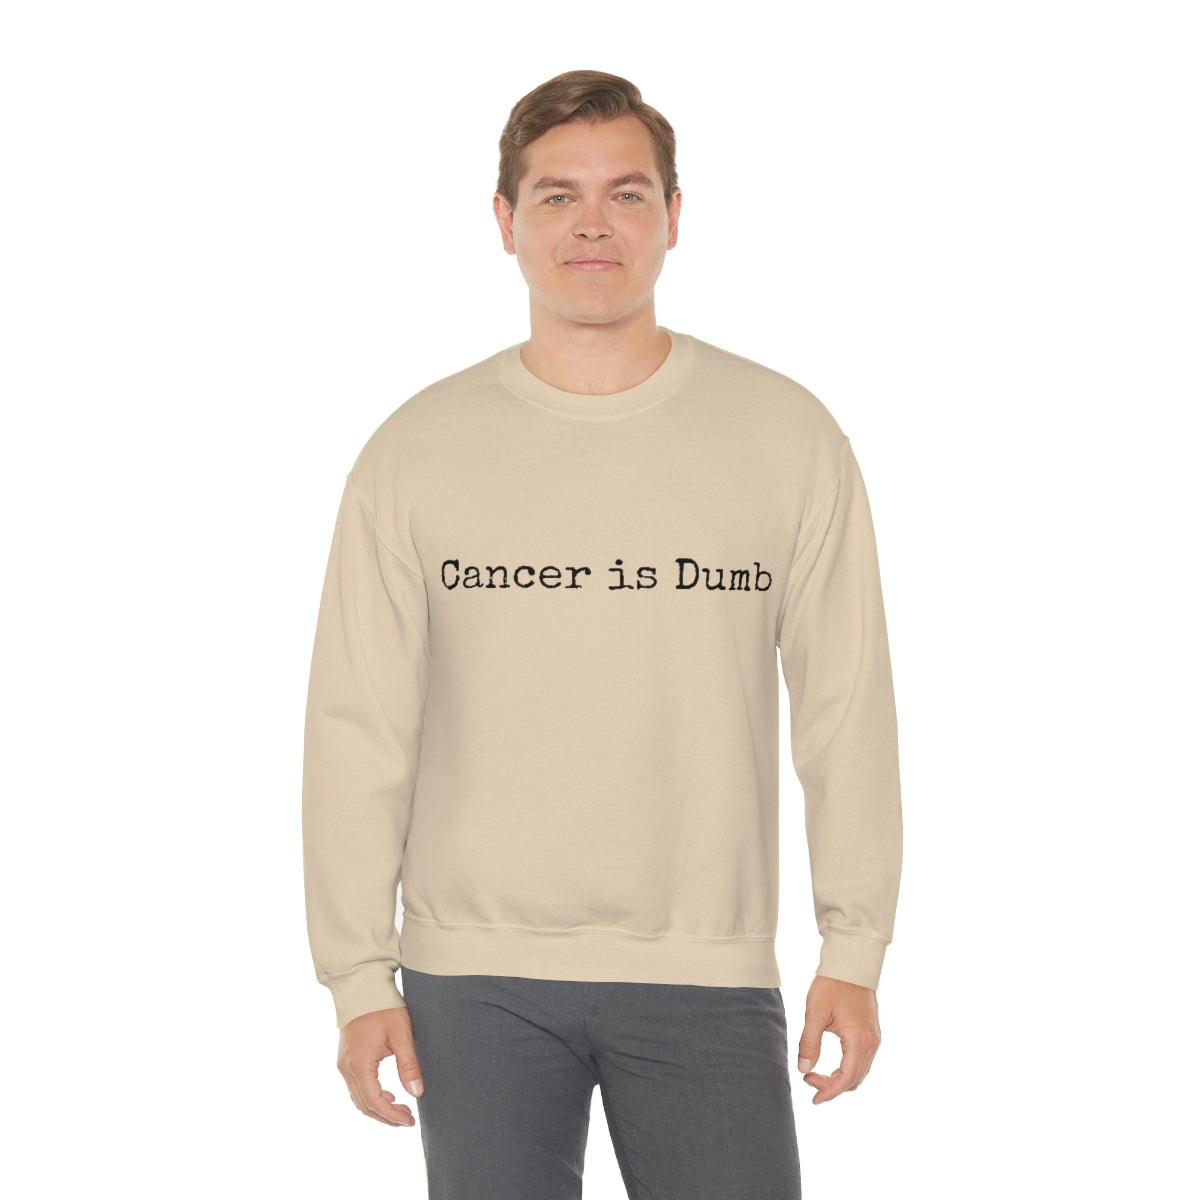 Unisex Heavy Blend™ Crewneck Sweatshirt Mens Womens Apparel Clothing Anti Cancer Cancer is Dumb Survivor Support Humorous Funny